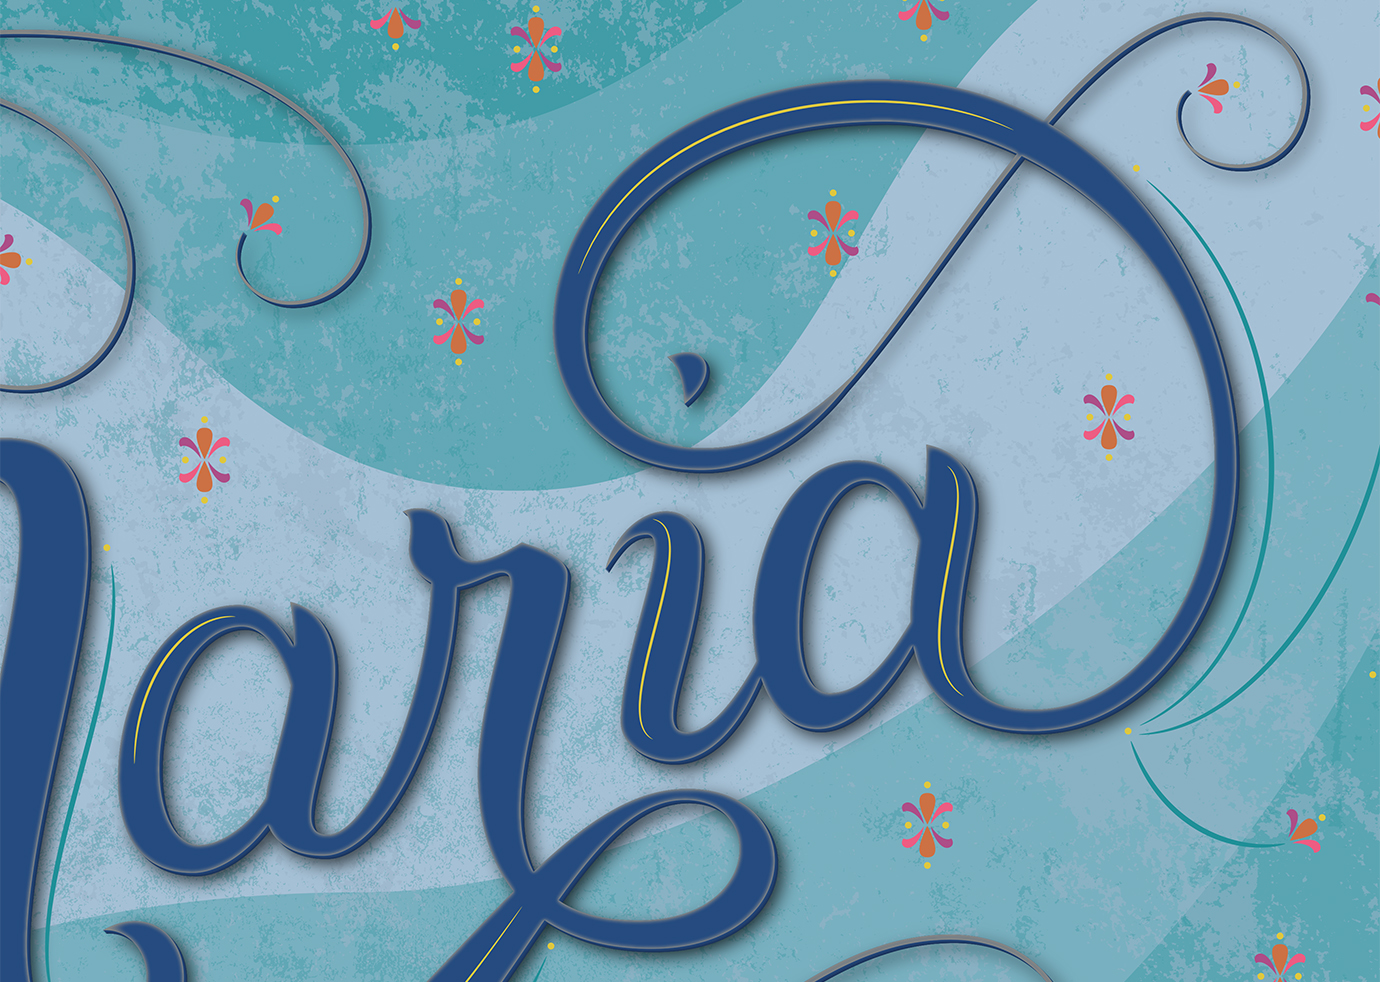 Lettering piece "Maria" detail